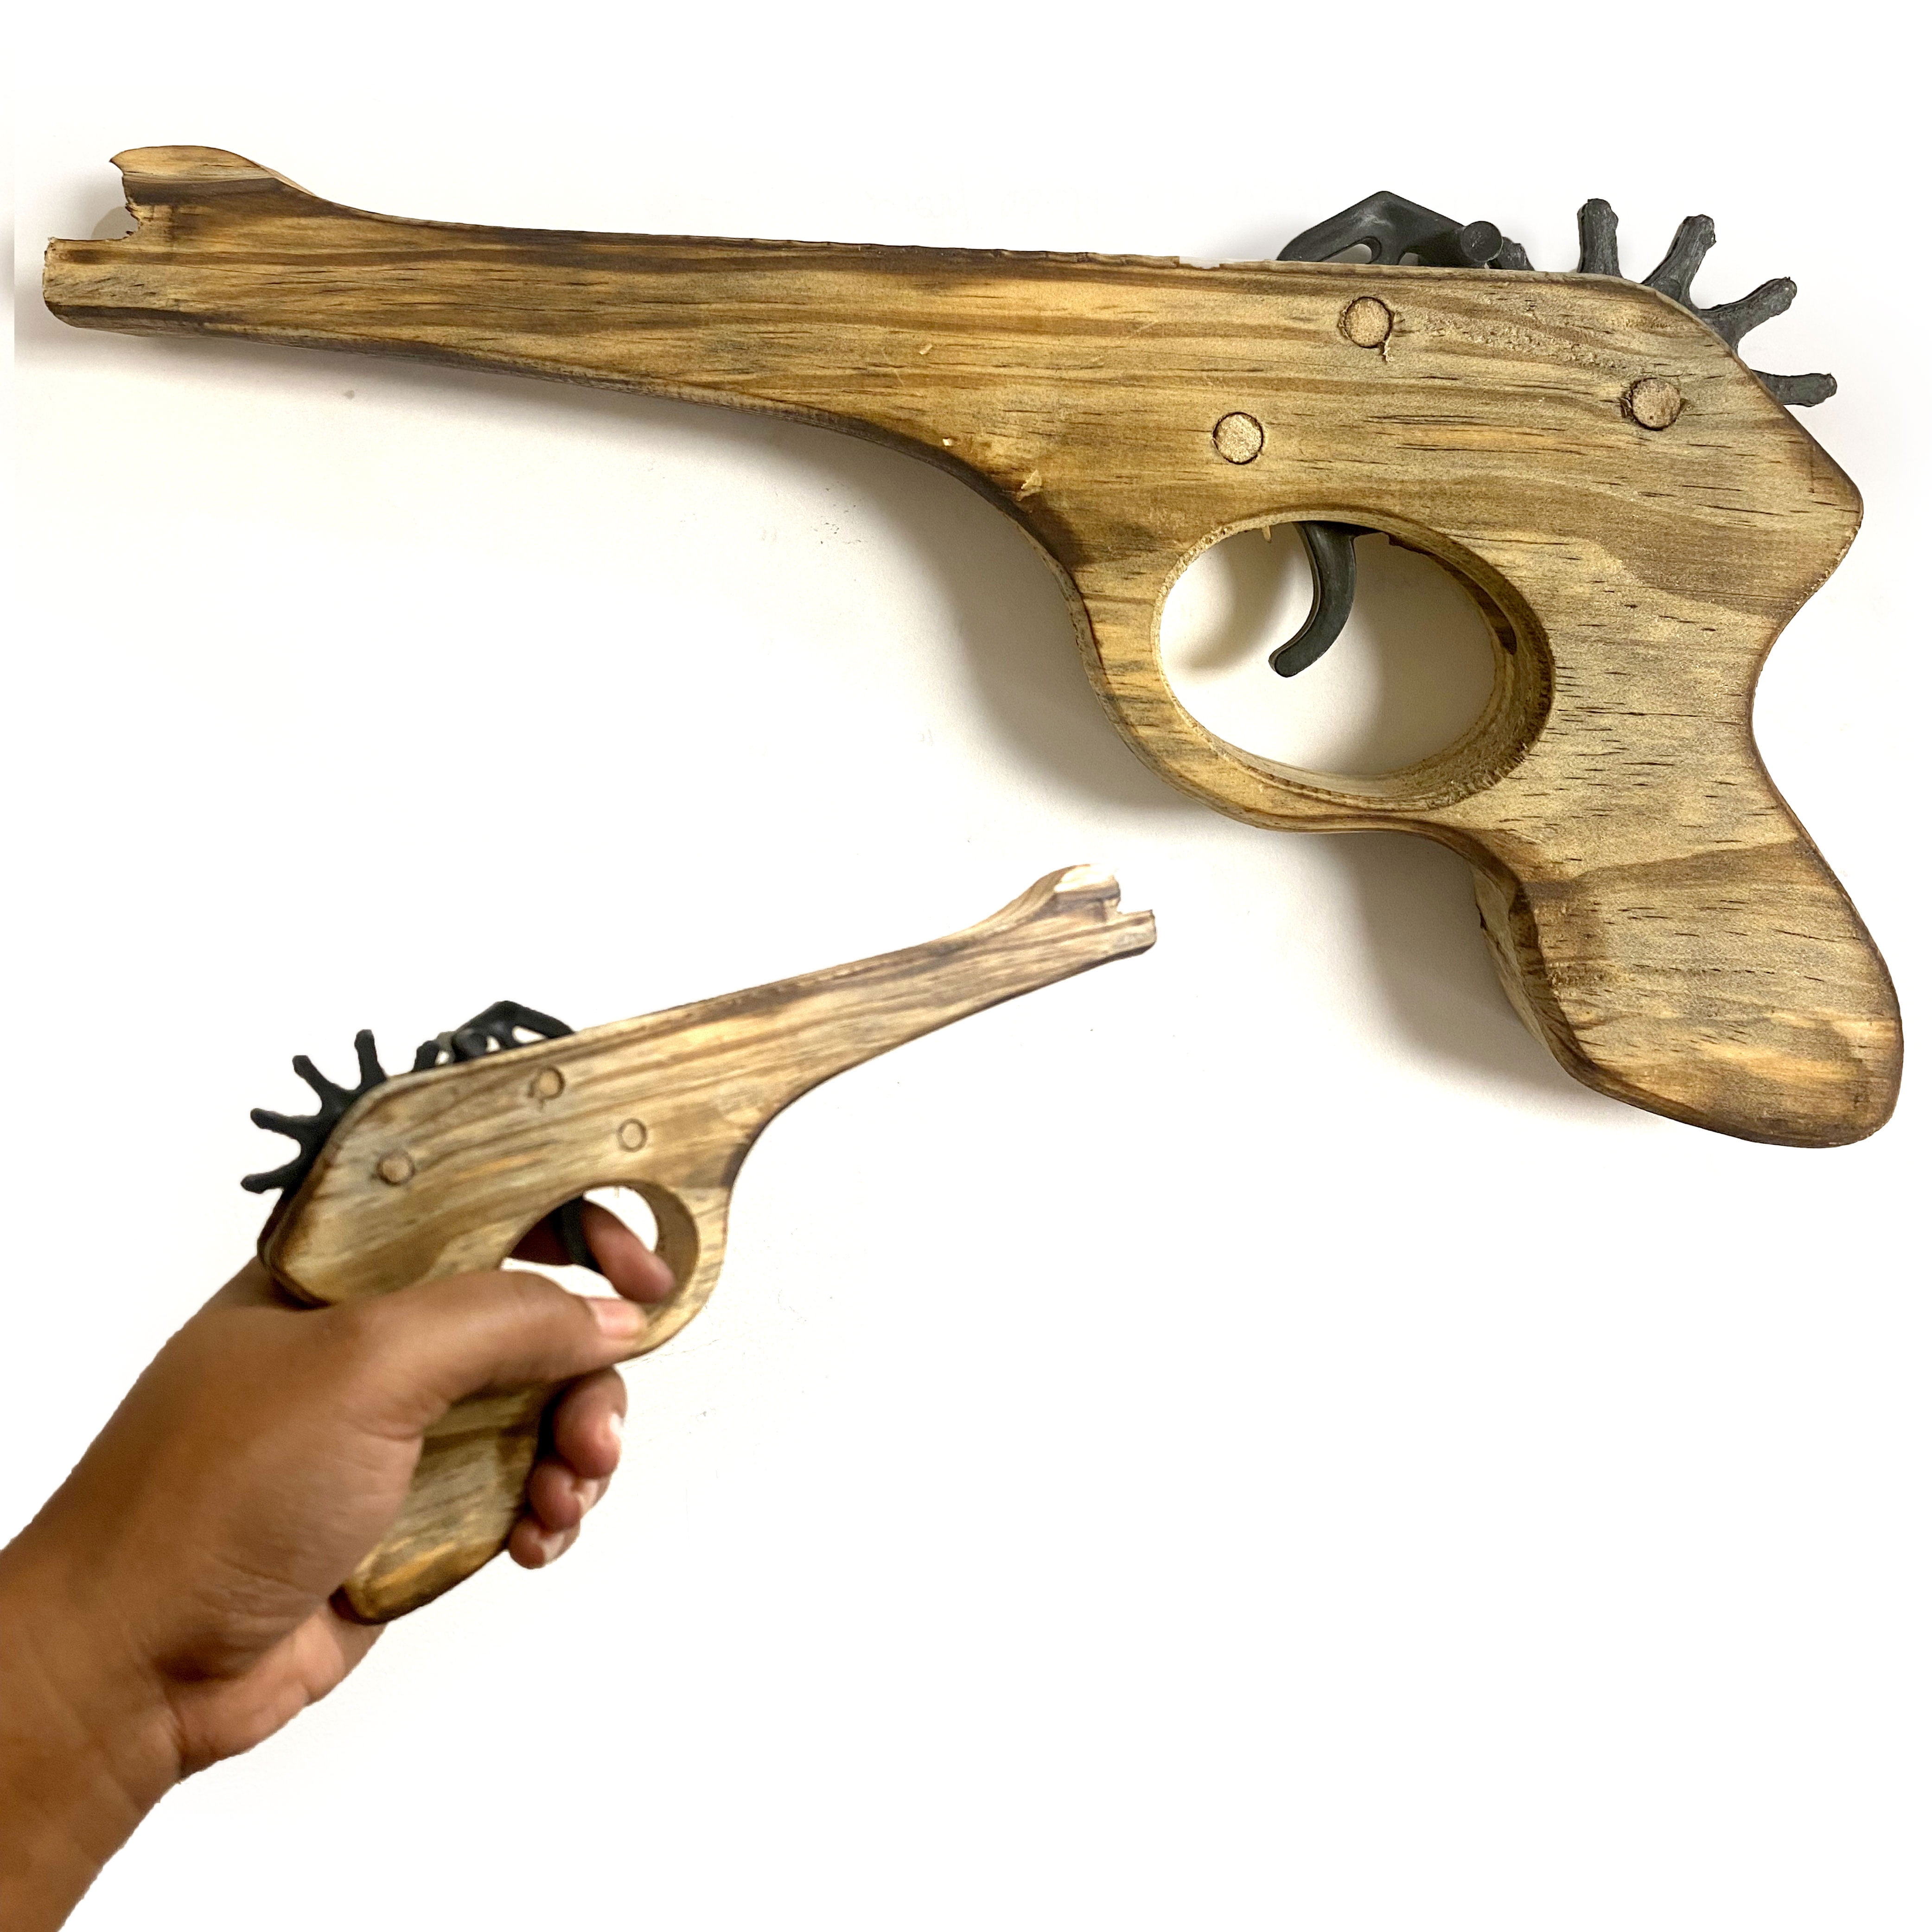 12" HANDCRAFTED COWBOY  WOODEN RUBBER BAND SHOOTING TOY GUN RILE STOCKING 